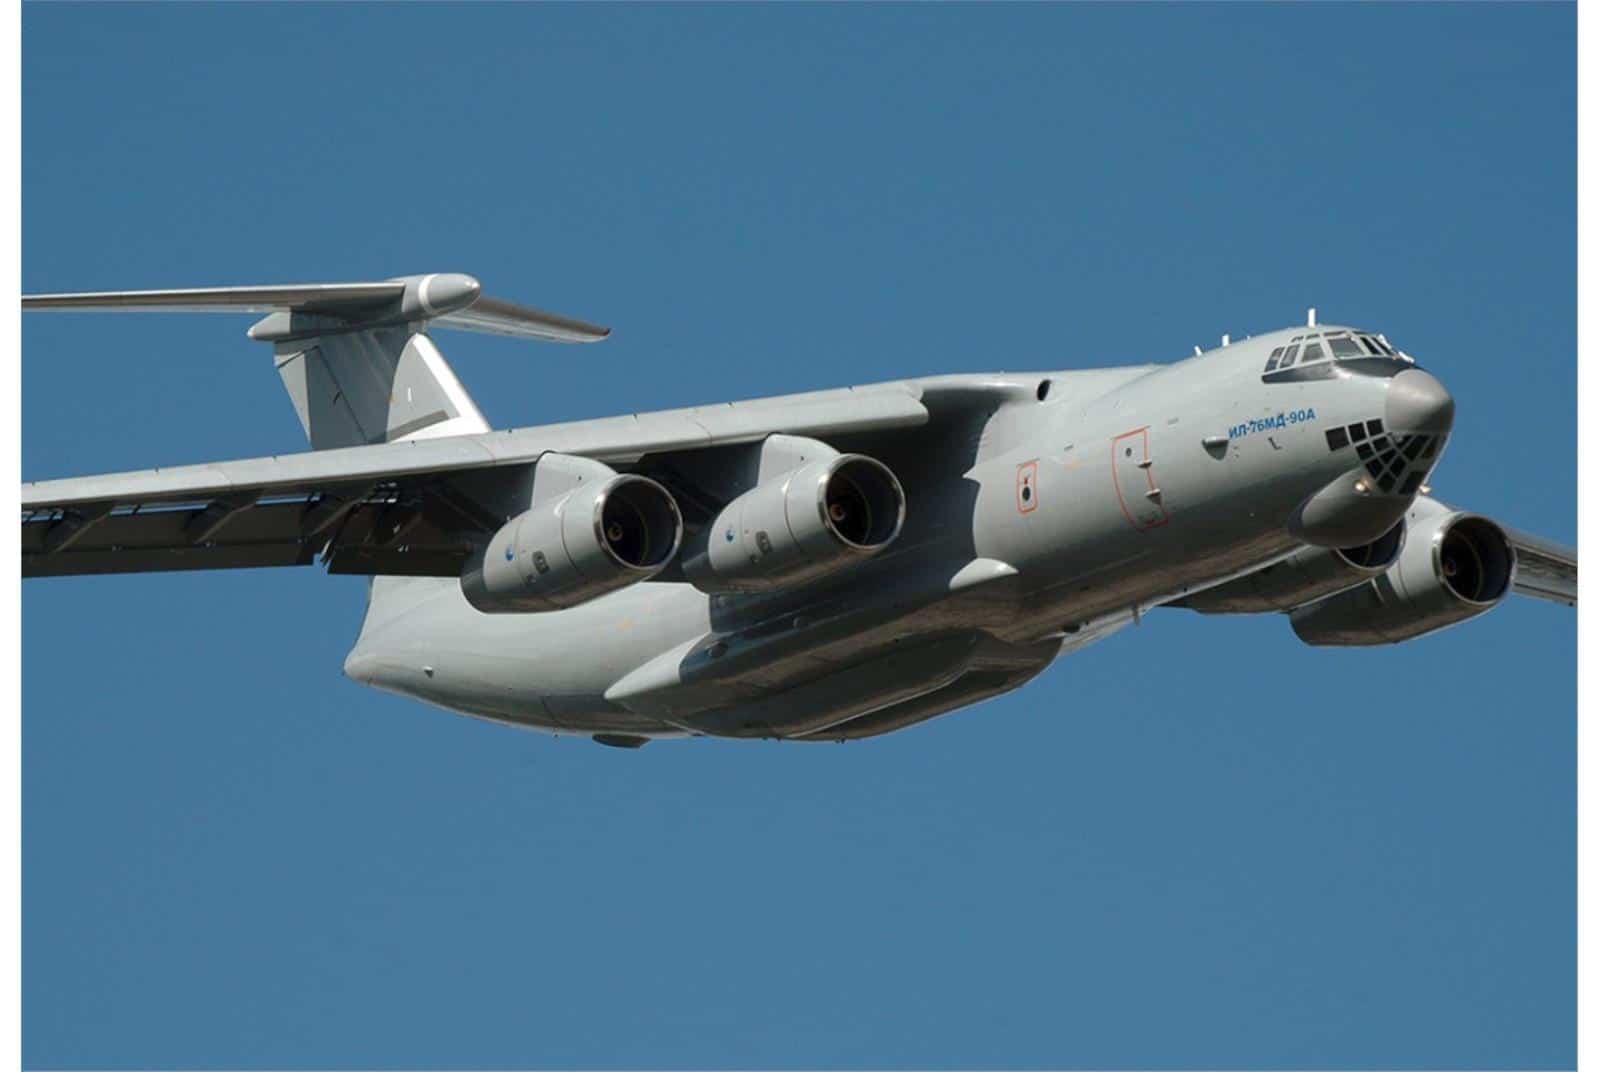 Russia to Get First Upgraded Il-76MD-90A Transport Plane | DefenceTalk